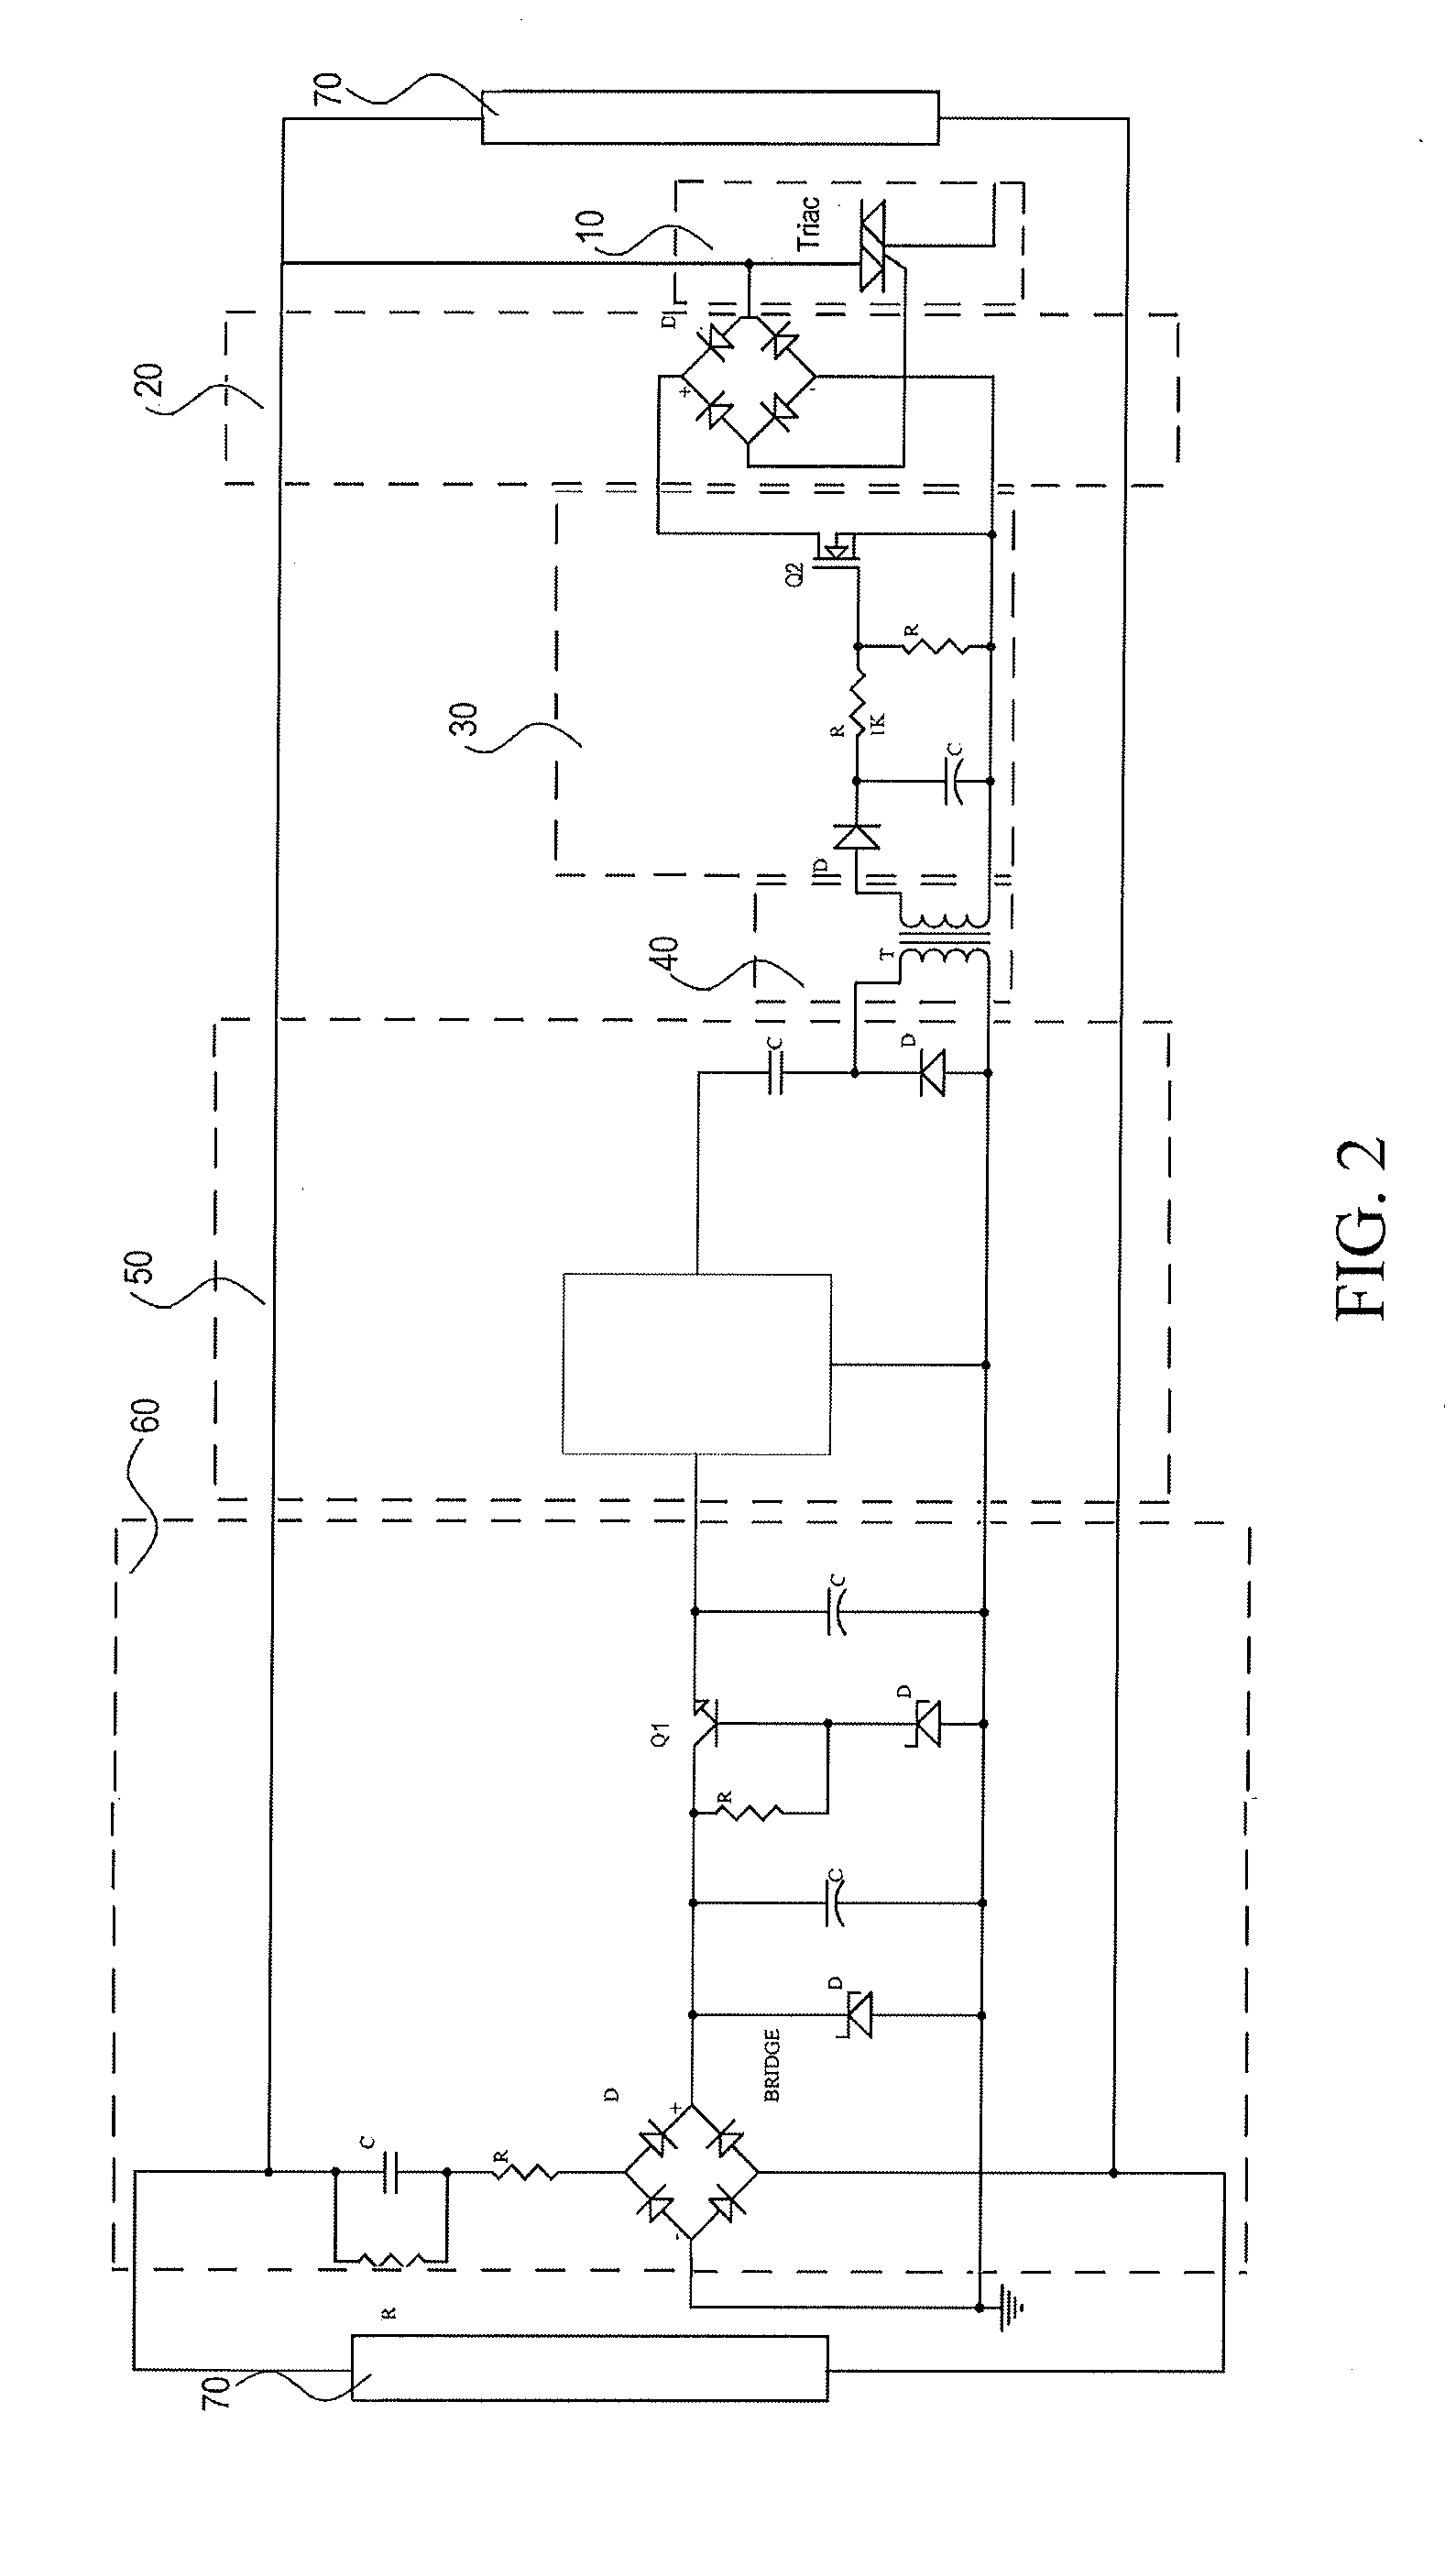 Switch circuit with independent DC power supply